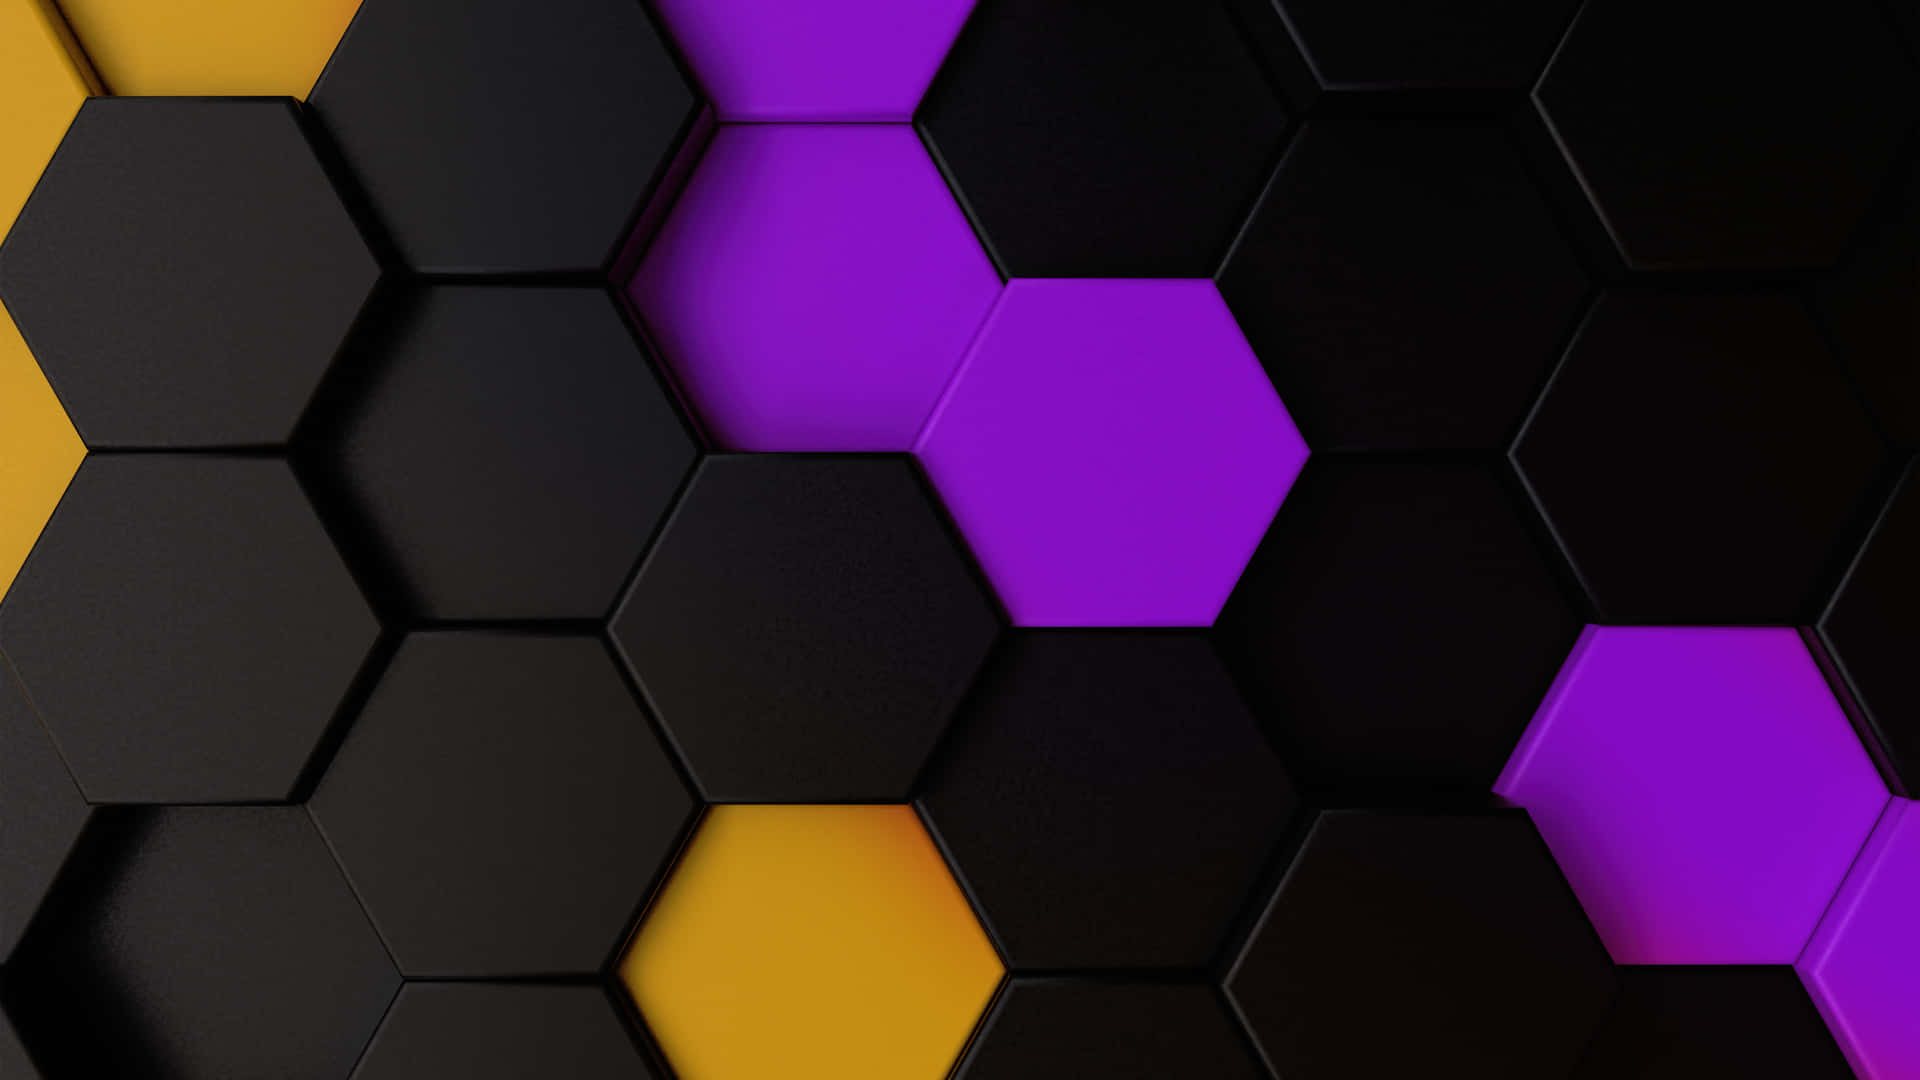 An abstract pattern of hexagons in a colorful fourK wallpaper Wallpaper